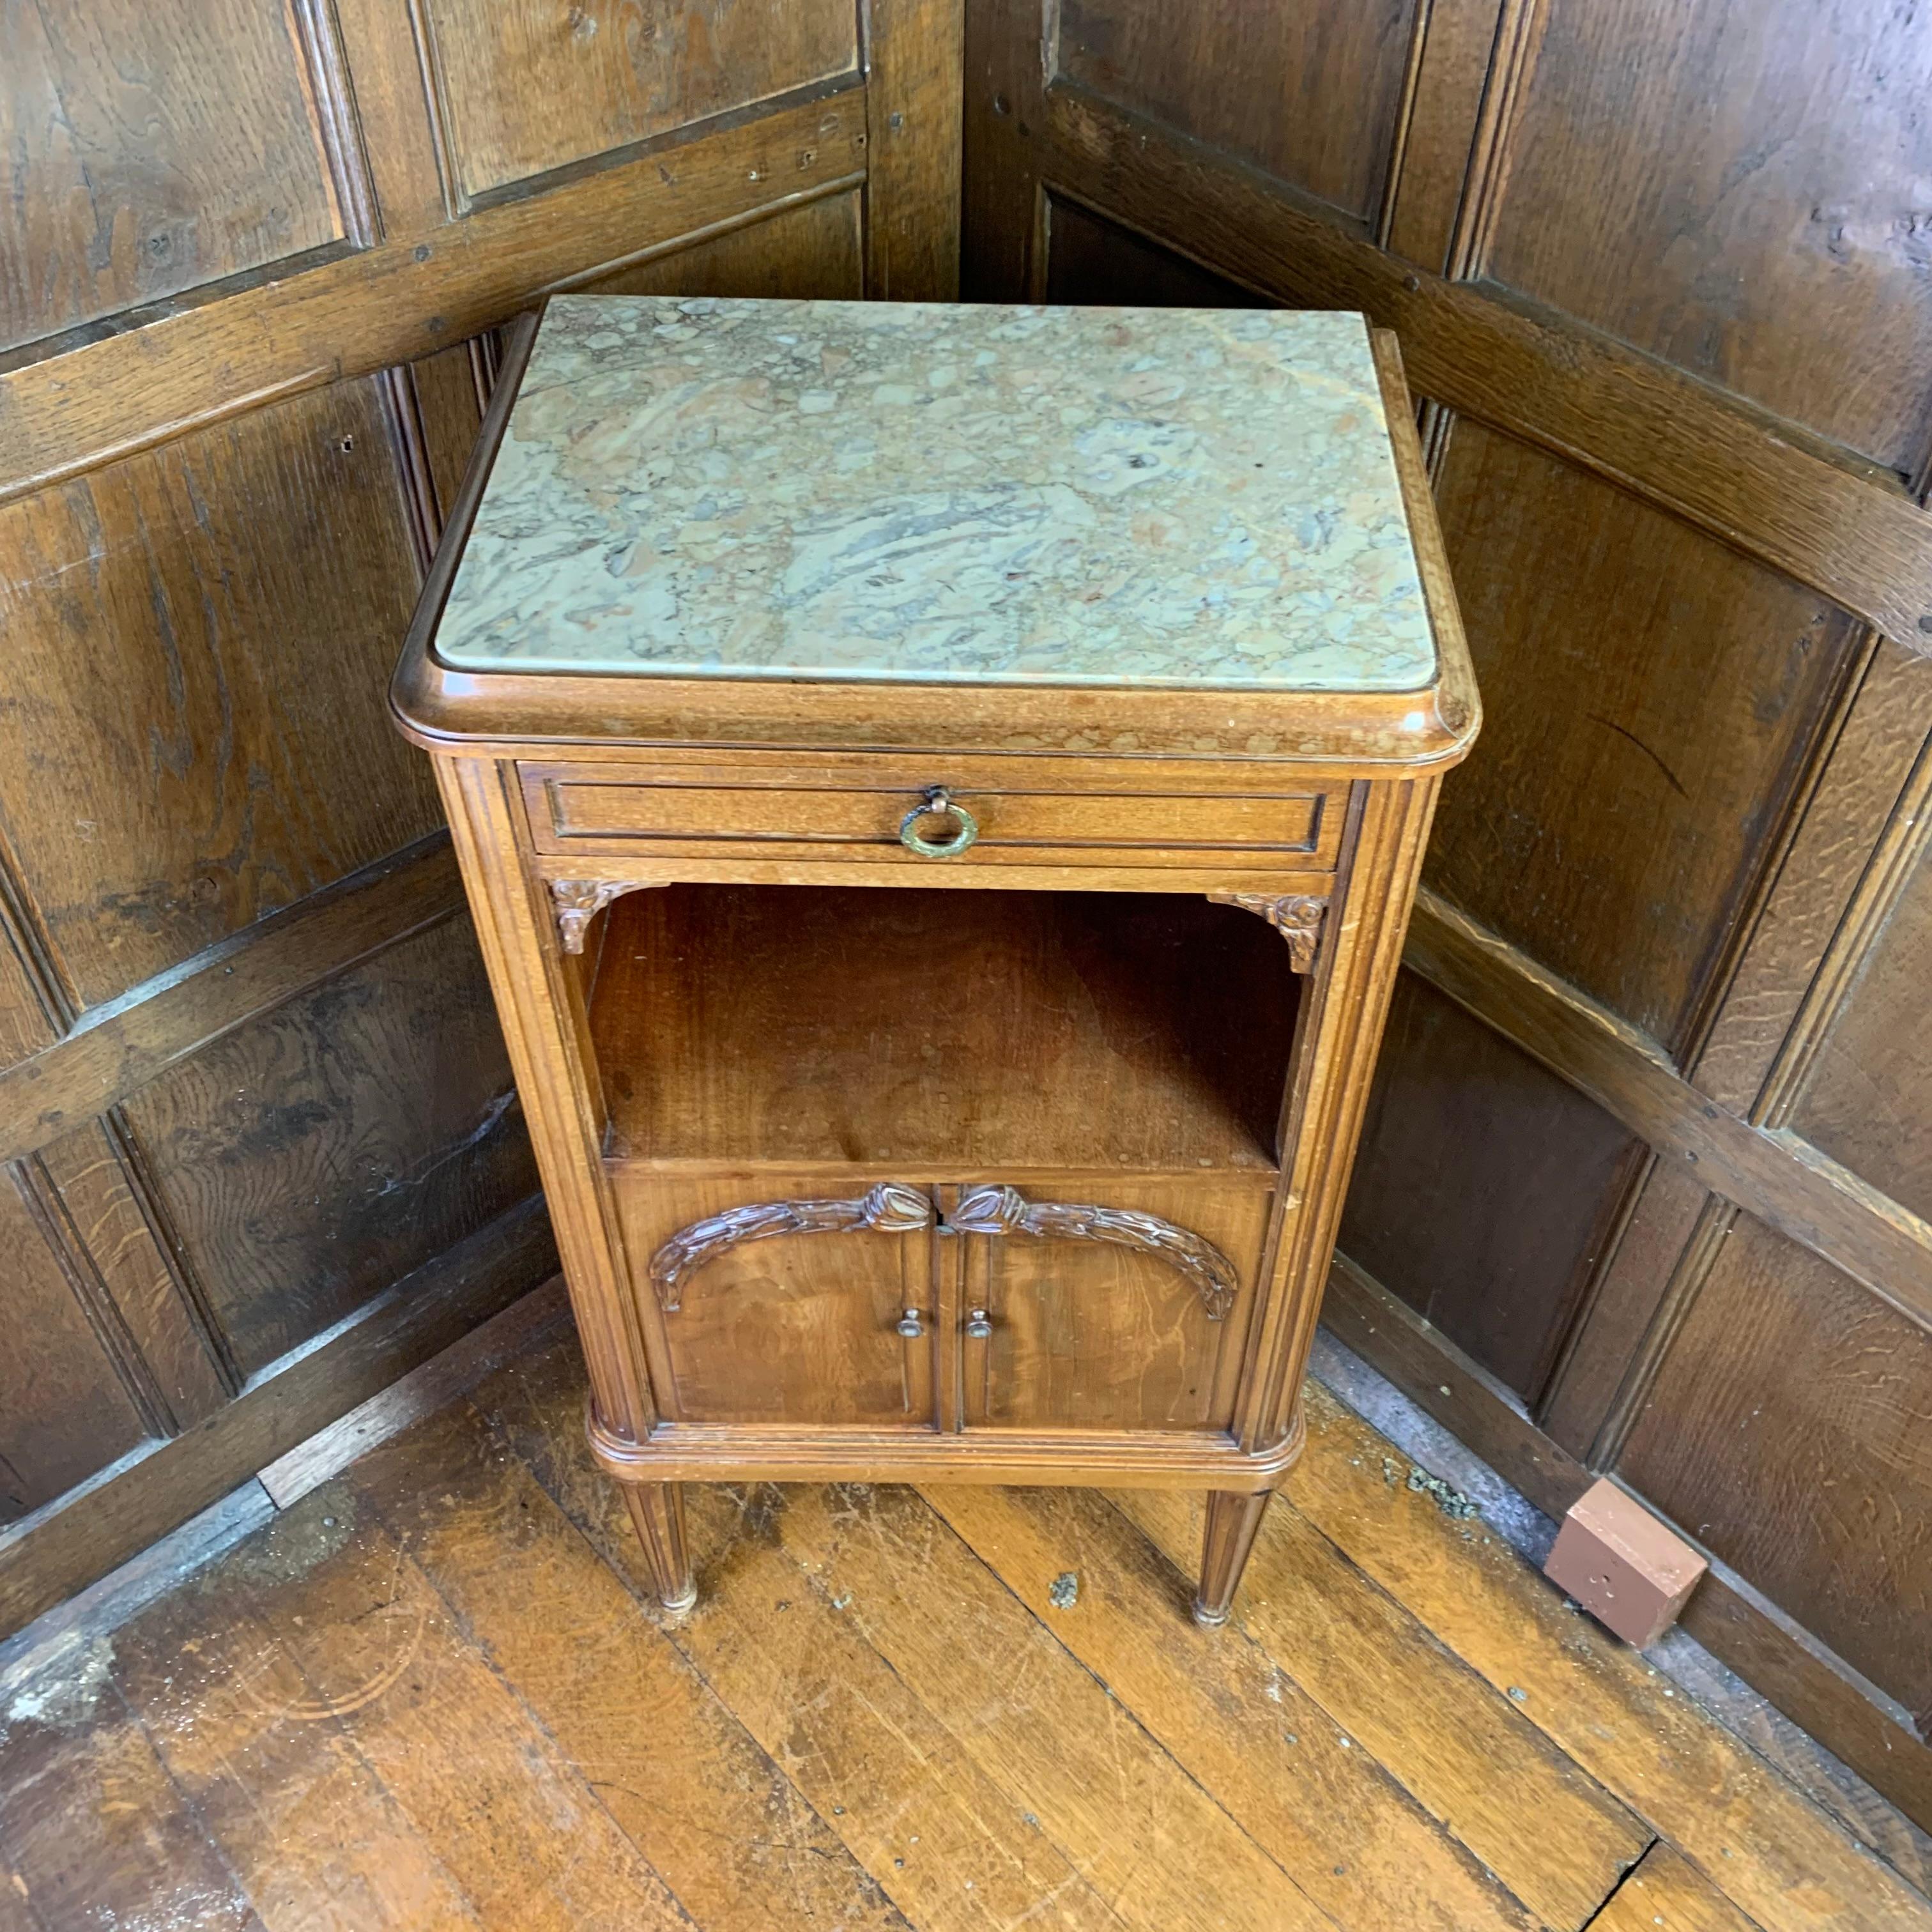 A fine quality late 19th century French walnut nightstand, the top inset with vieined white marble with concave outer mouding above a single drawer and an open shelf. Below is a two-door cupboard which is beautifully lined in marble and the whole is